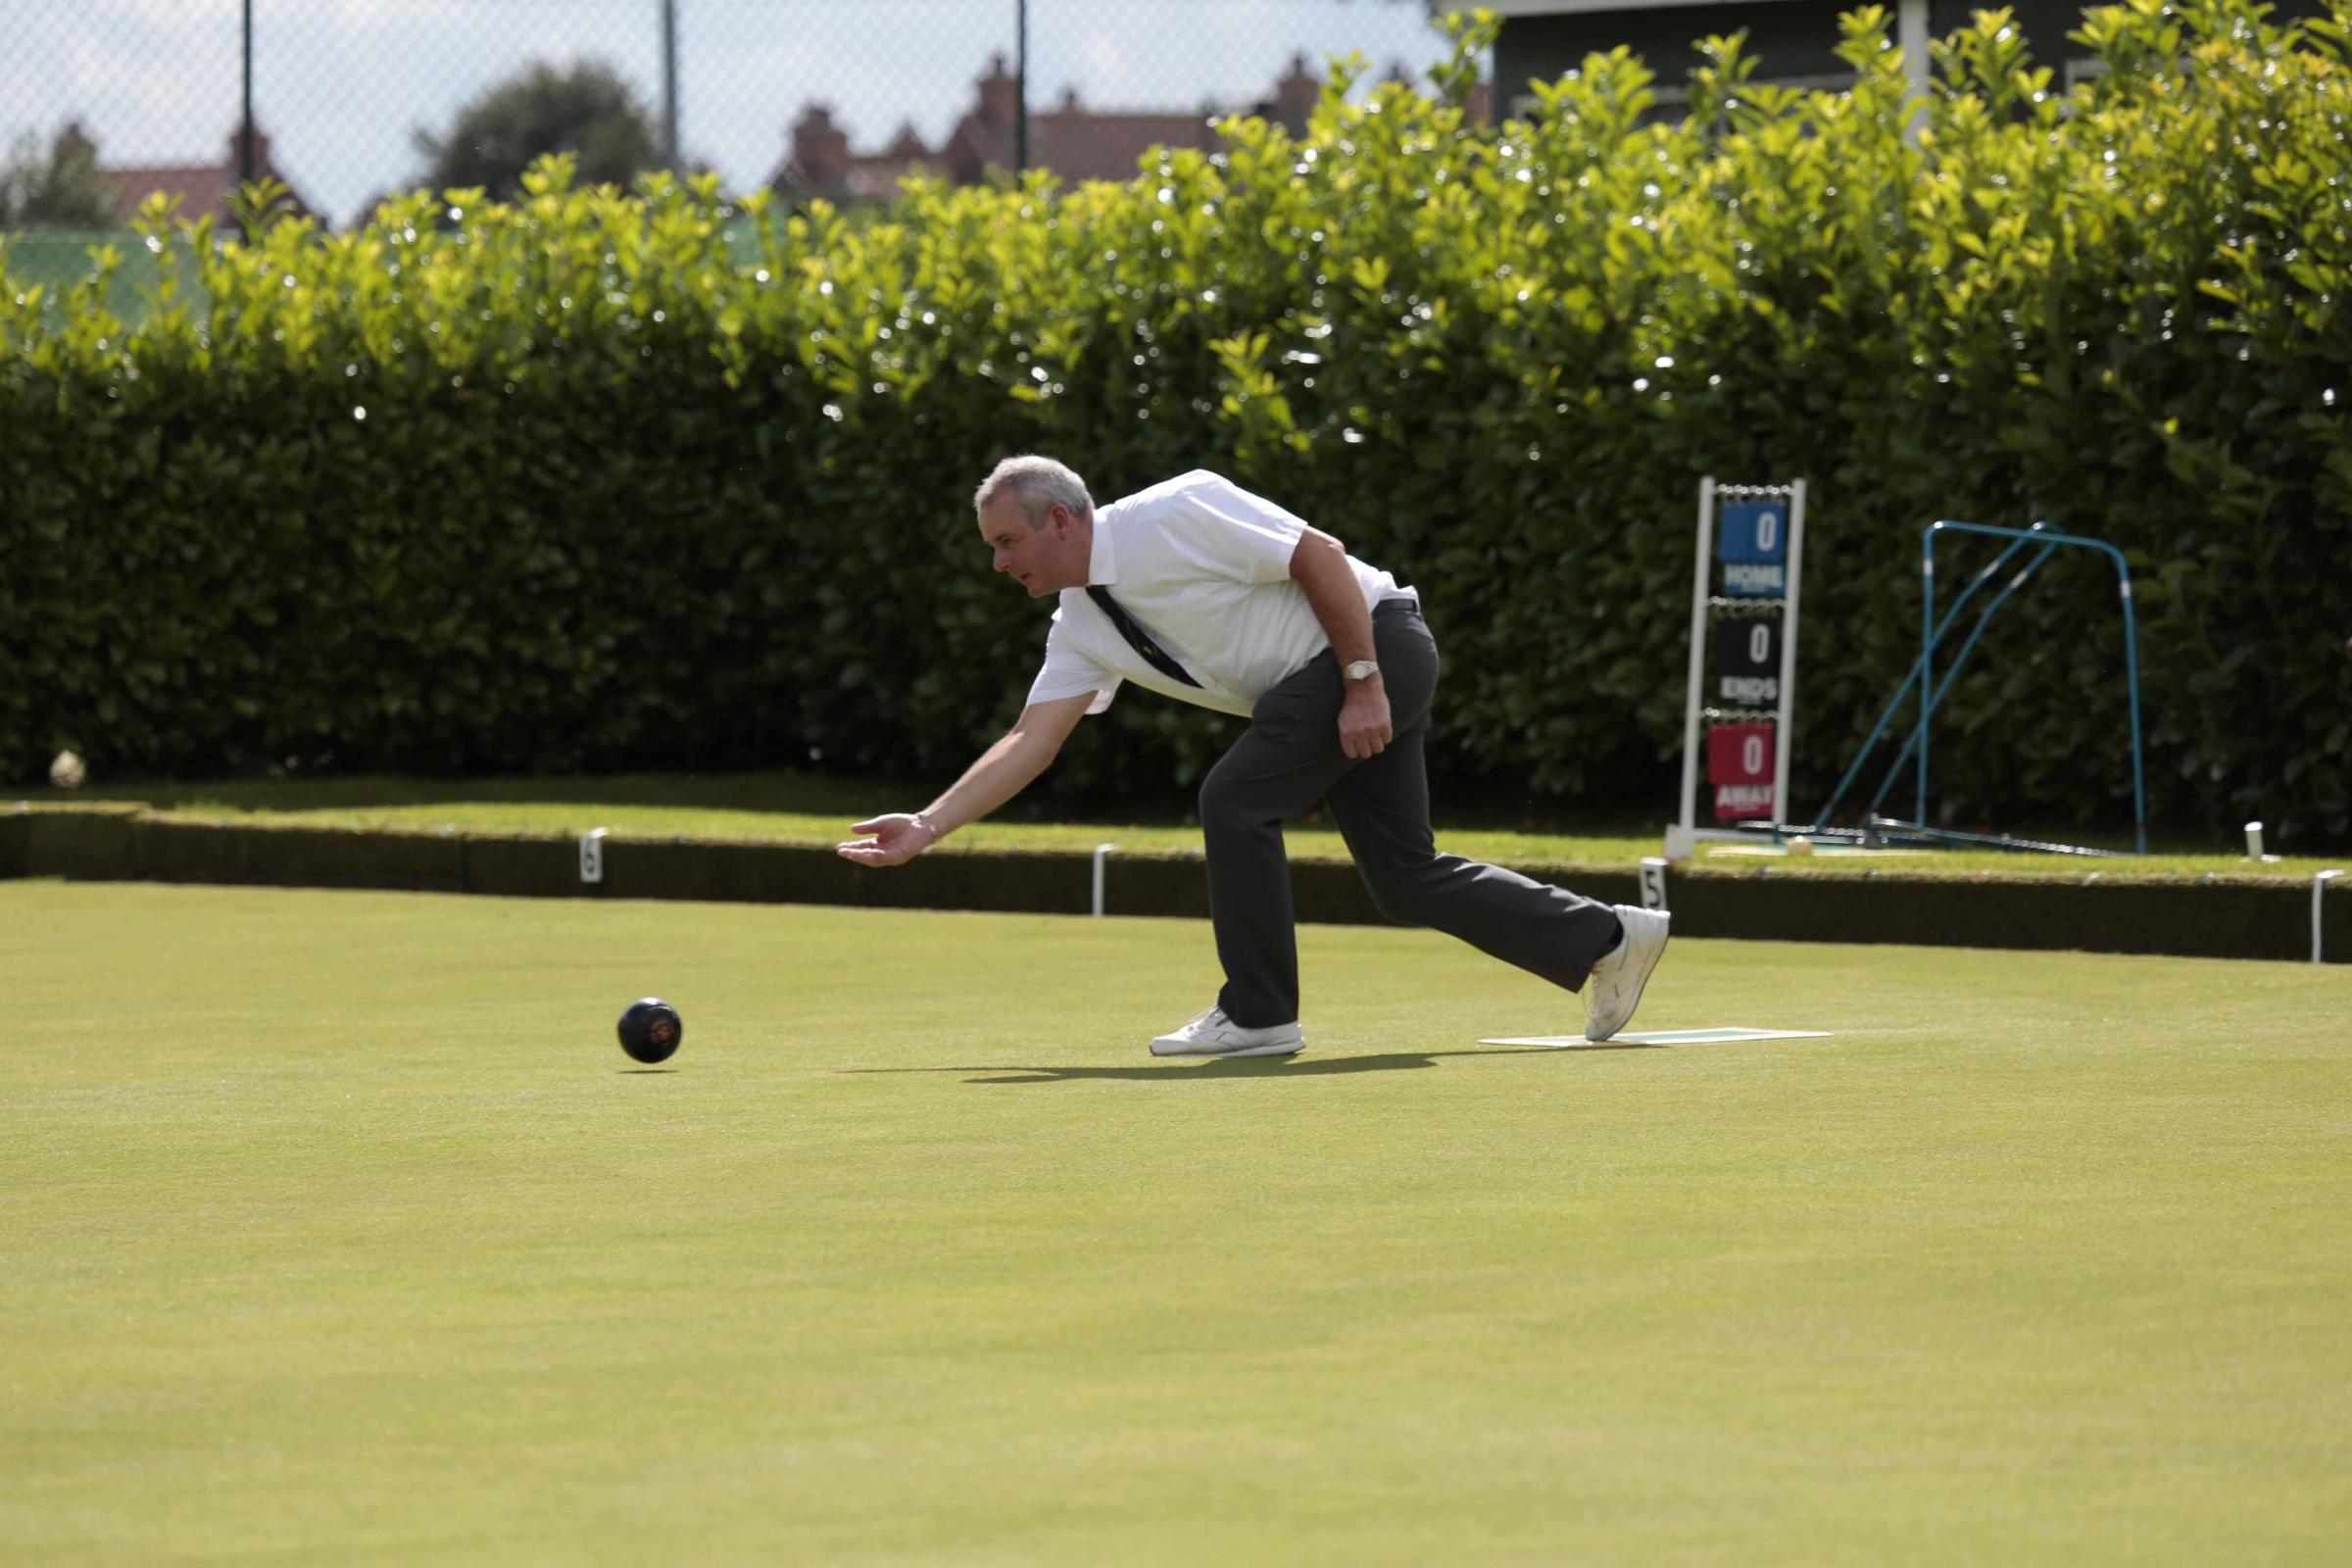 Thirsk bowls club Picture: Barry Hewson 